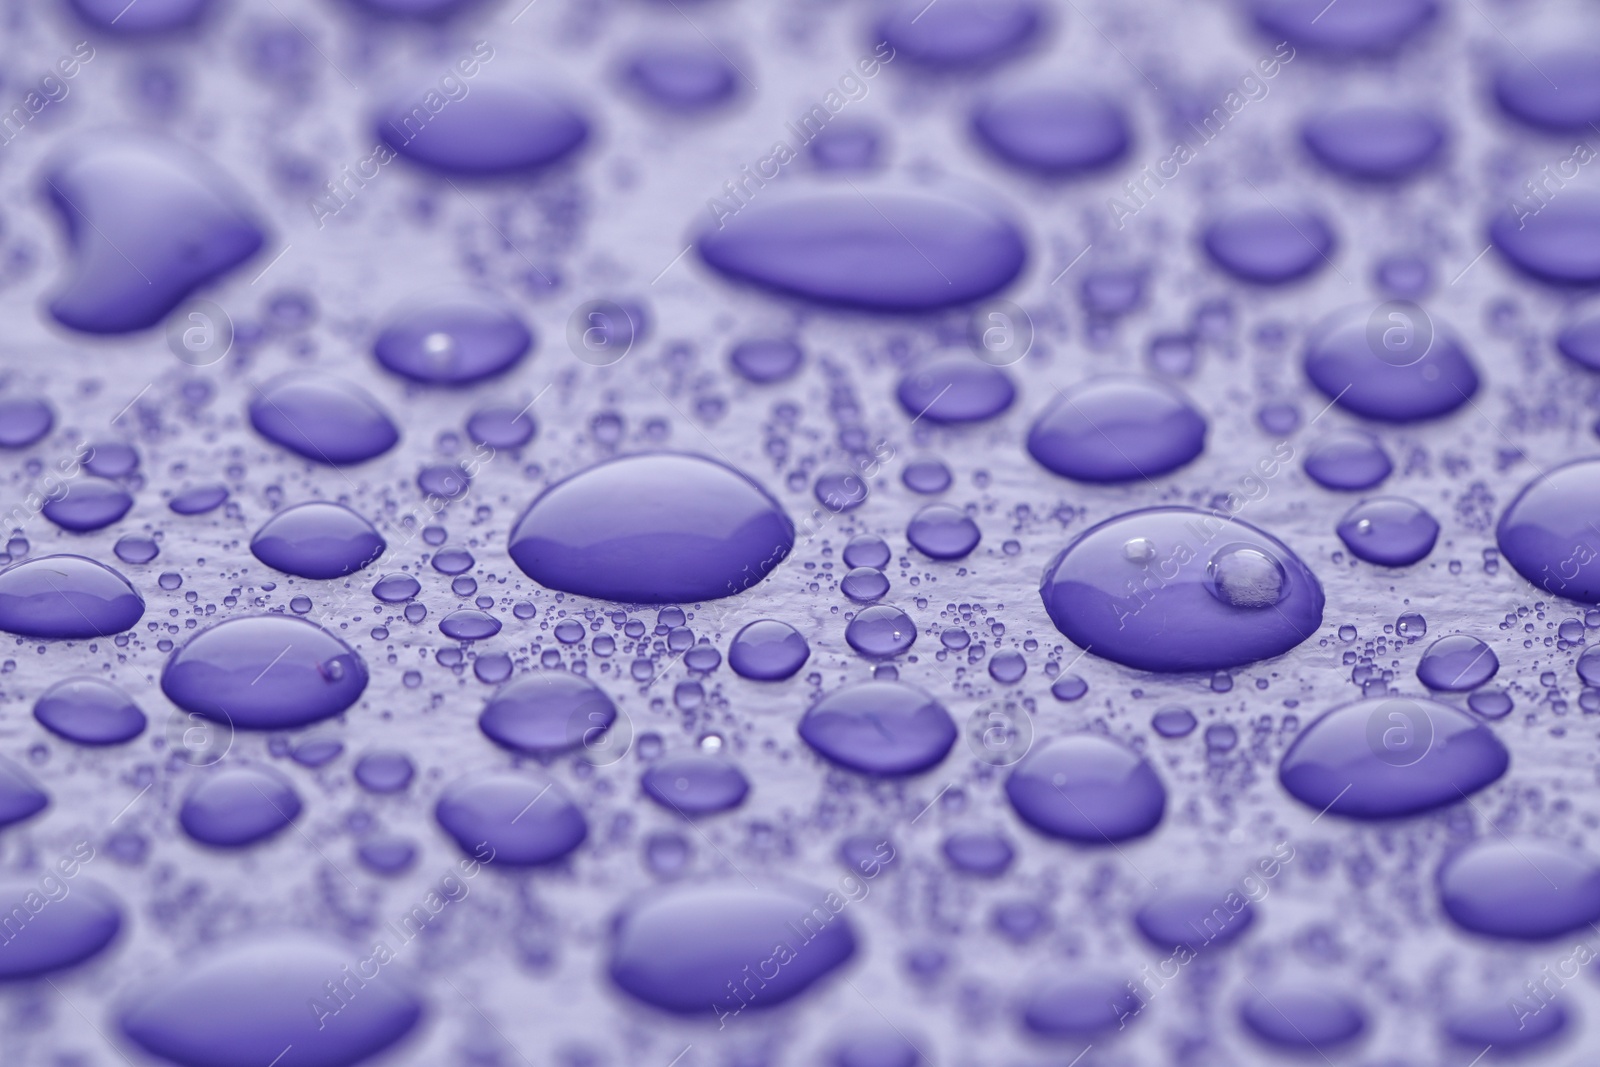 Photo of Water drops on lilac background, closeup view